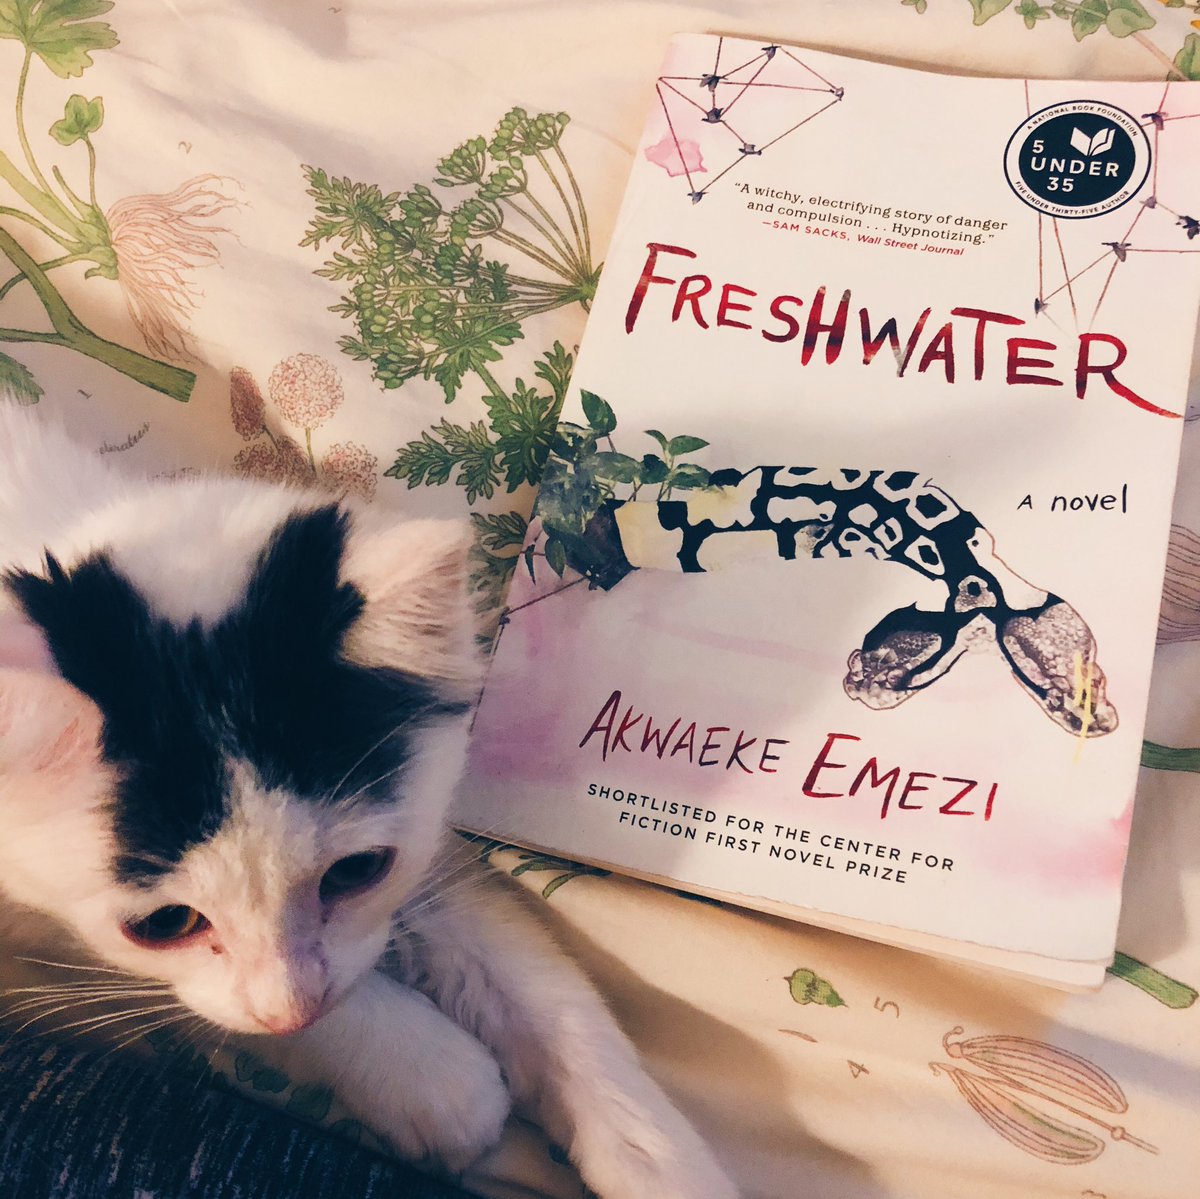 It’s #newepisode day! Listen to our discussion of Akwaeke Emezi’s debut novel, Freshwater! Available wherever you get your #podcasts! 
(Adorable kitten not included.)

#booksquadgoals #bookpisode #instabook #akwaekeemezi #freshwater 

podcasts.apple.com/us/podcast/boo…